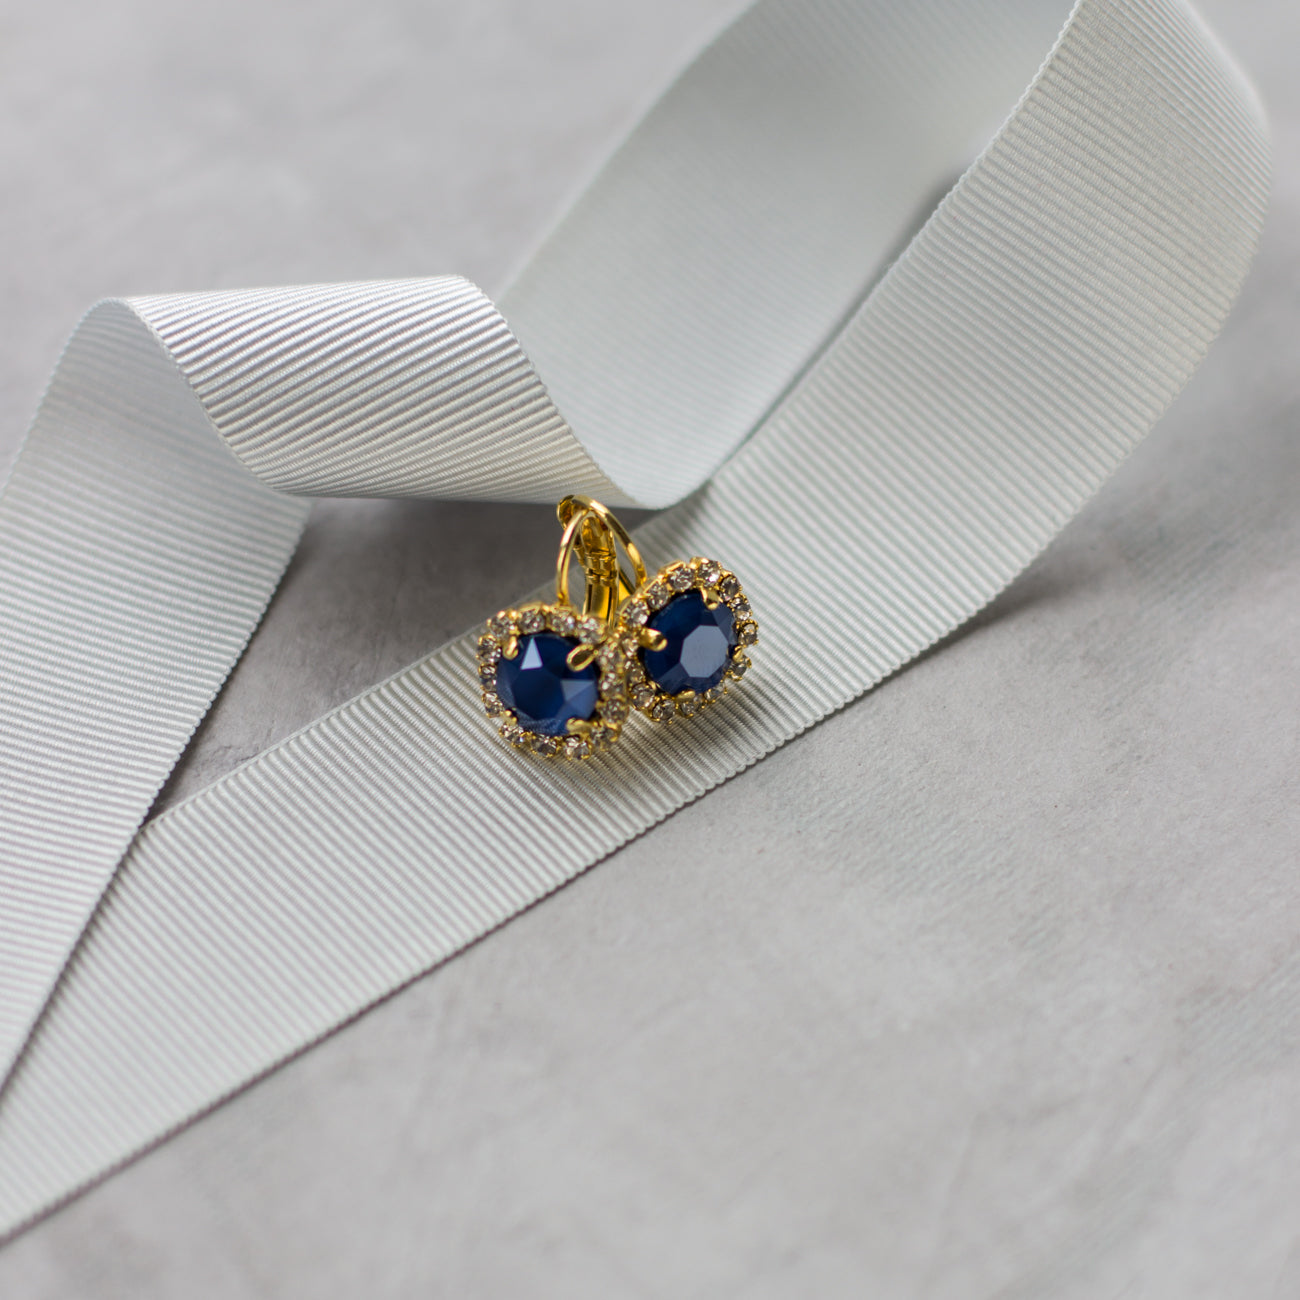 Small crystal earrings. Royal blue jewelry. Gold crystal earrings. Swarovski accessories. 